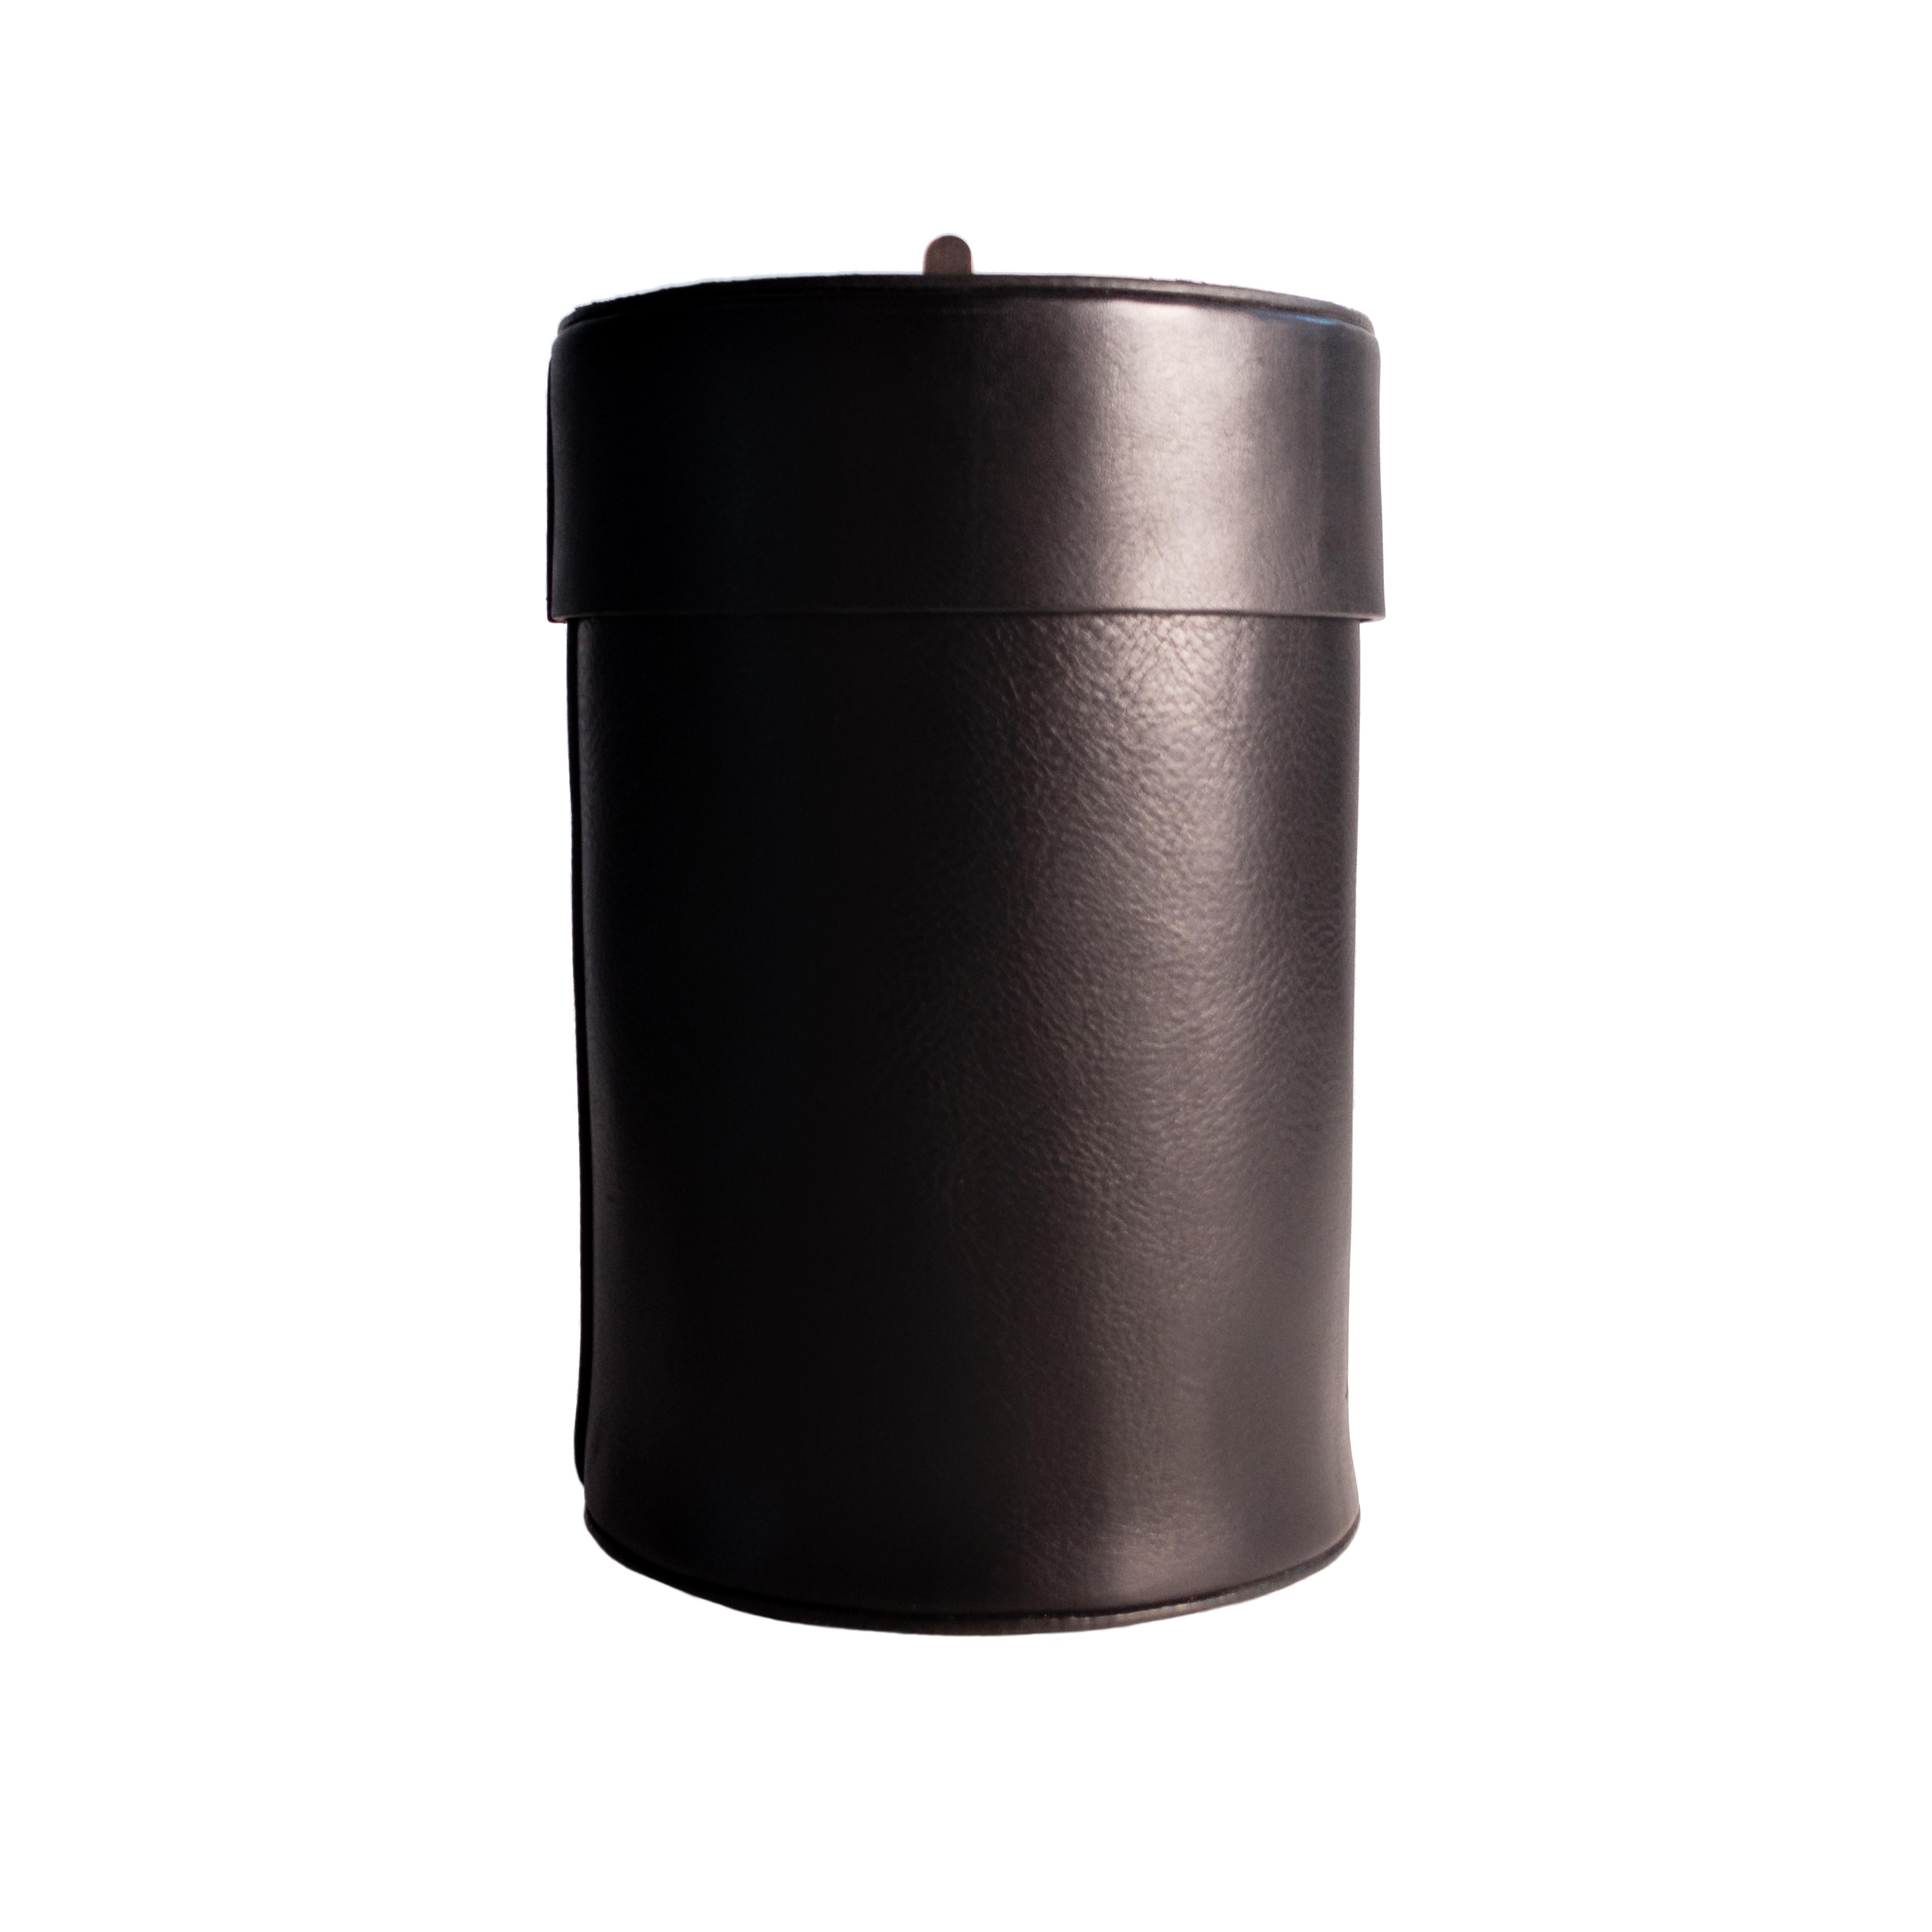 Luxury Paper Bin Handcrafted in Black Cowhide Leather with Brass Details For Sale